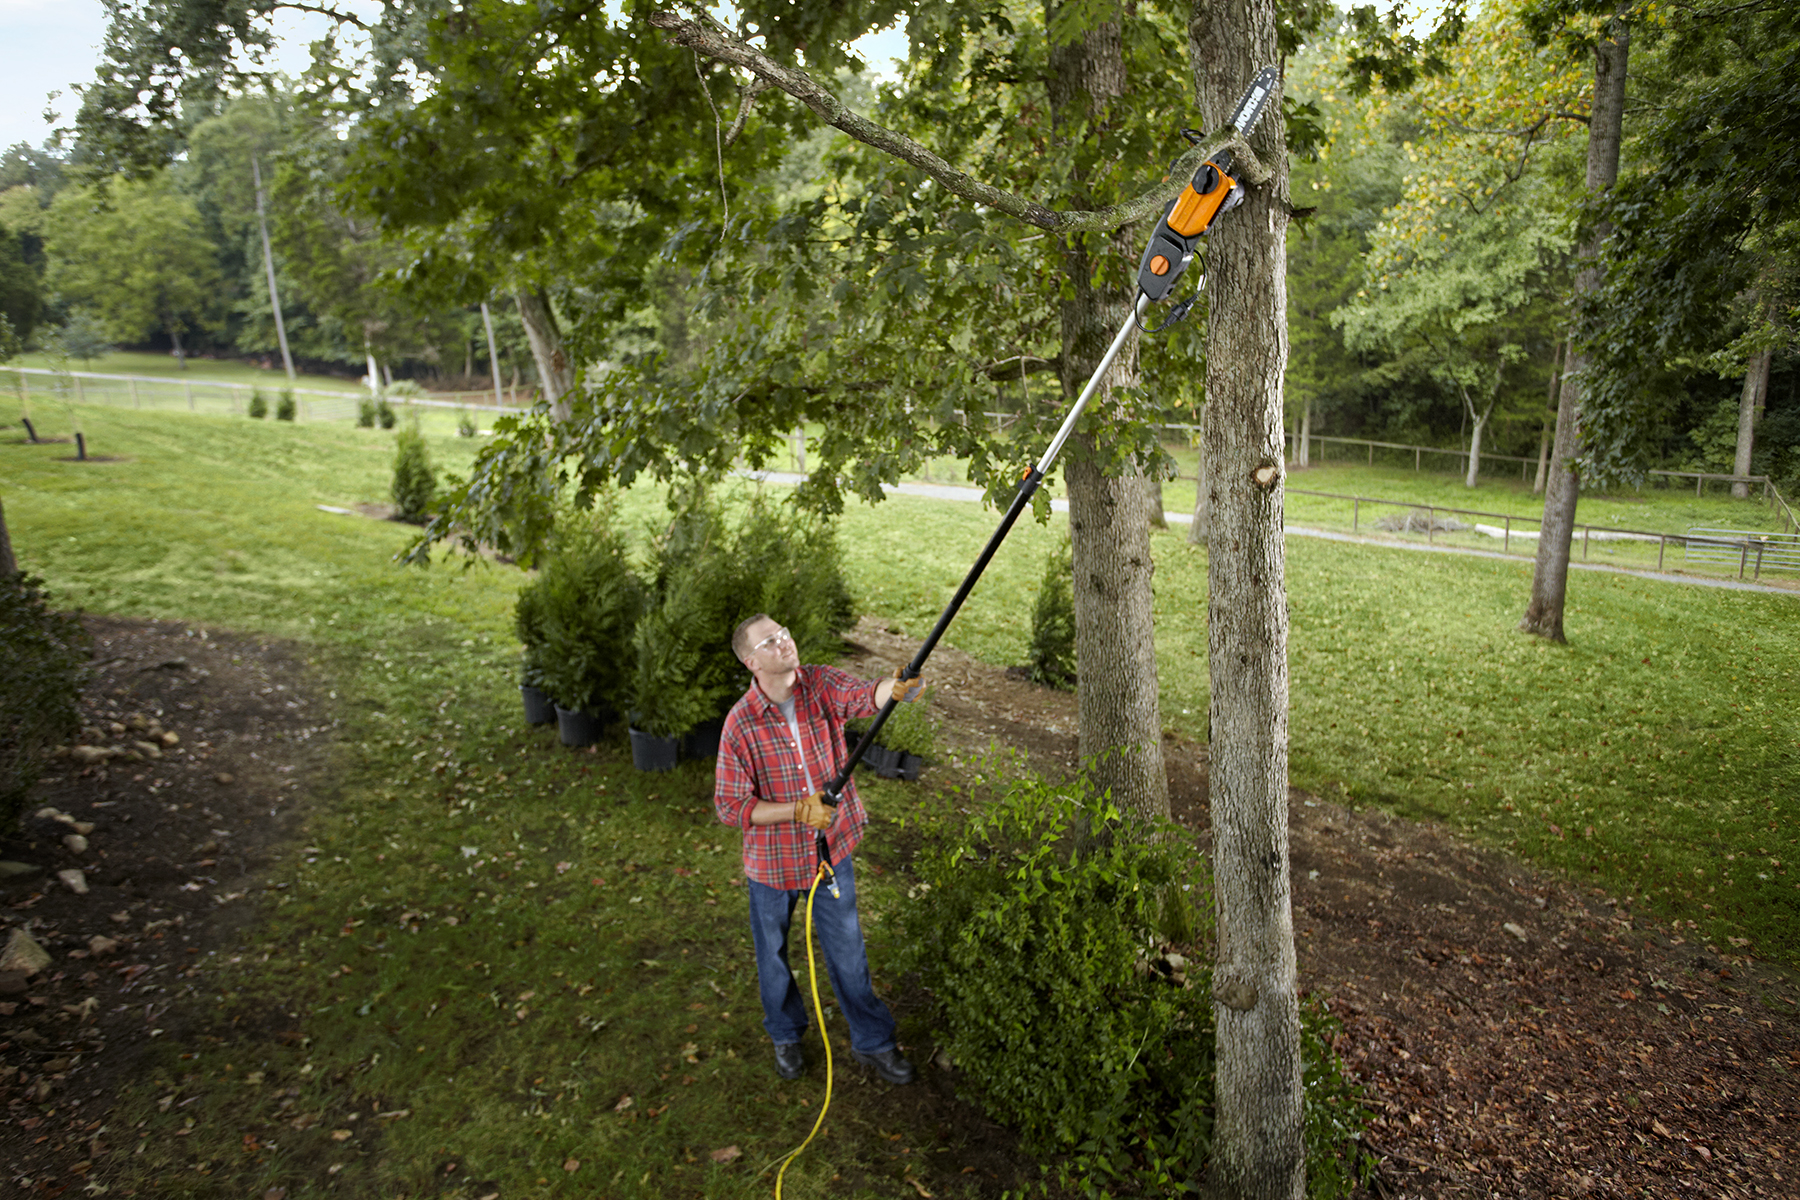 WORX 8A, 10 in. Electric Pole Saw is ideal for spring pruning and trimming.